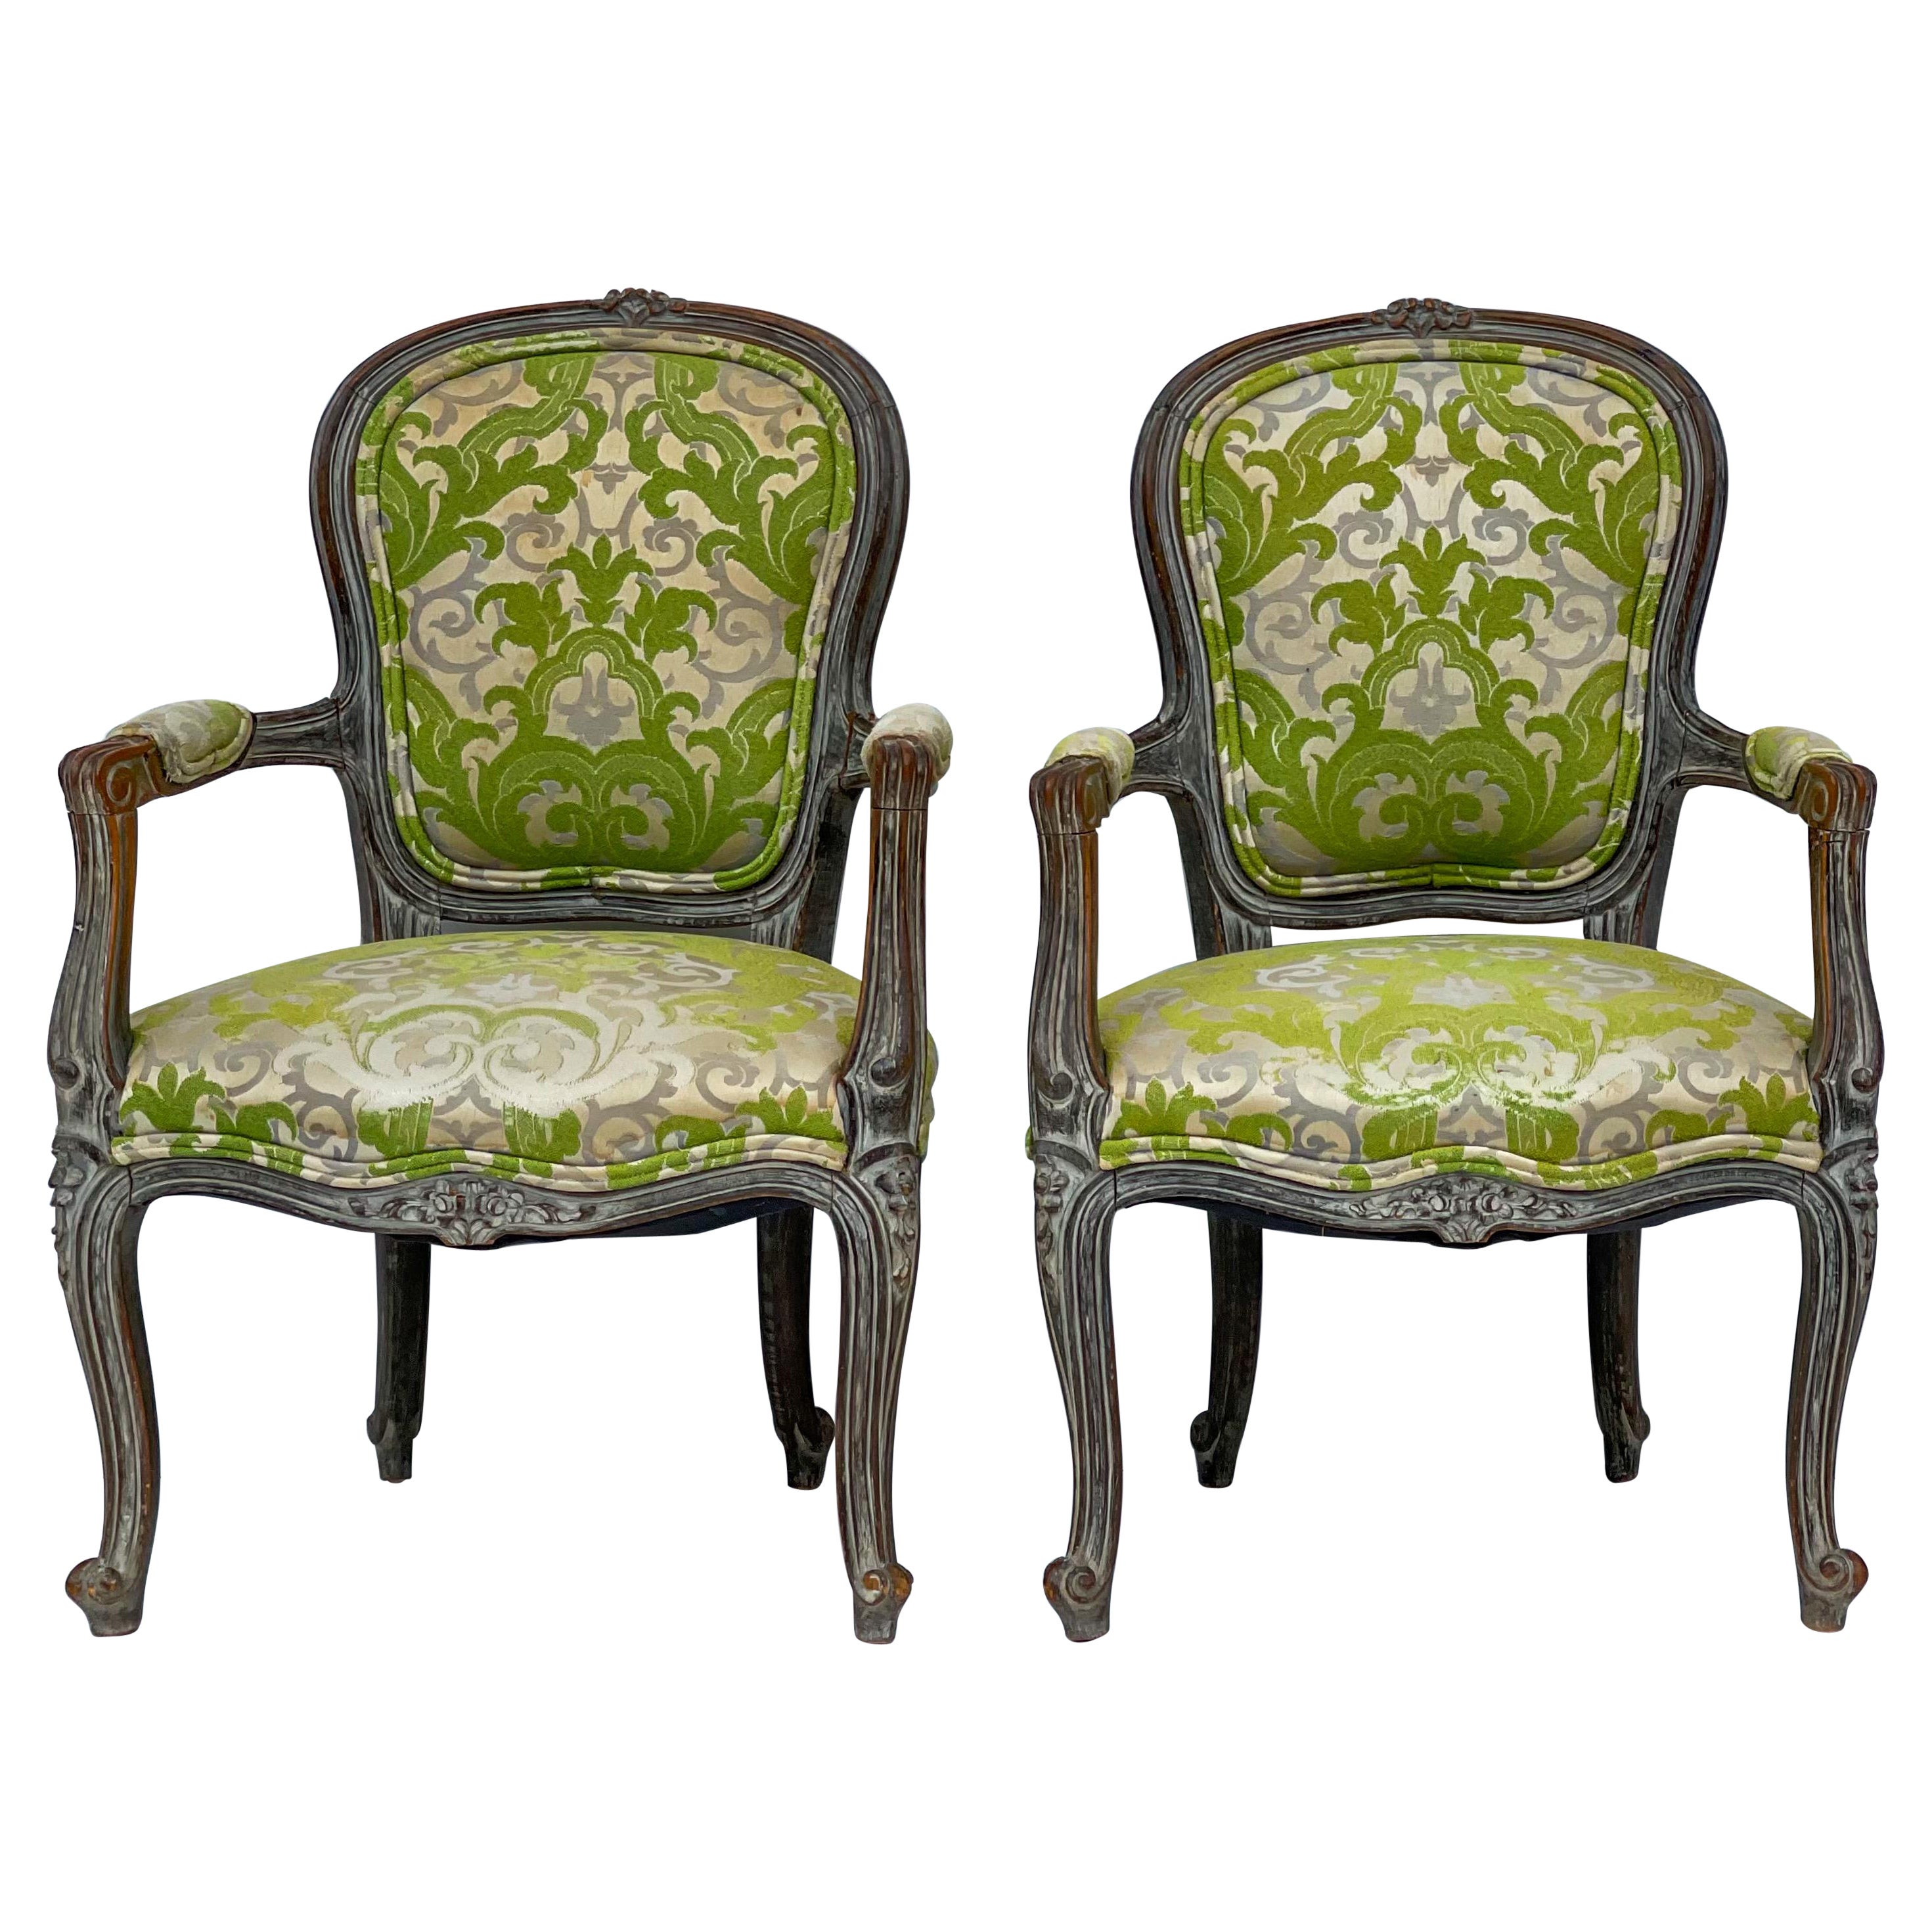 Early French Louis XVI Style Child’s Chairs in Chartreuse Damask, Pair For Sale